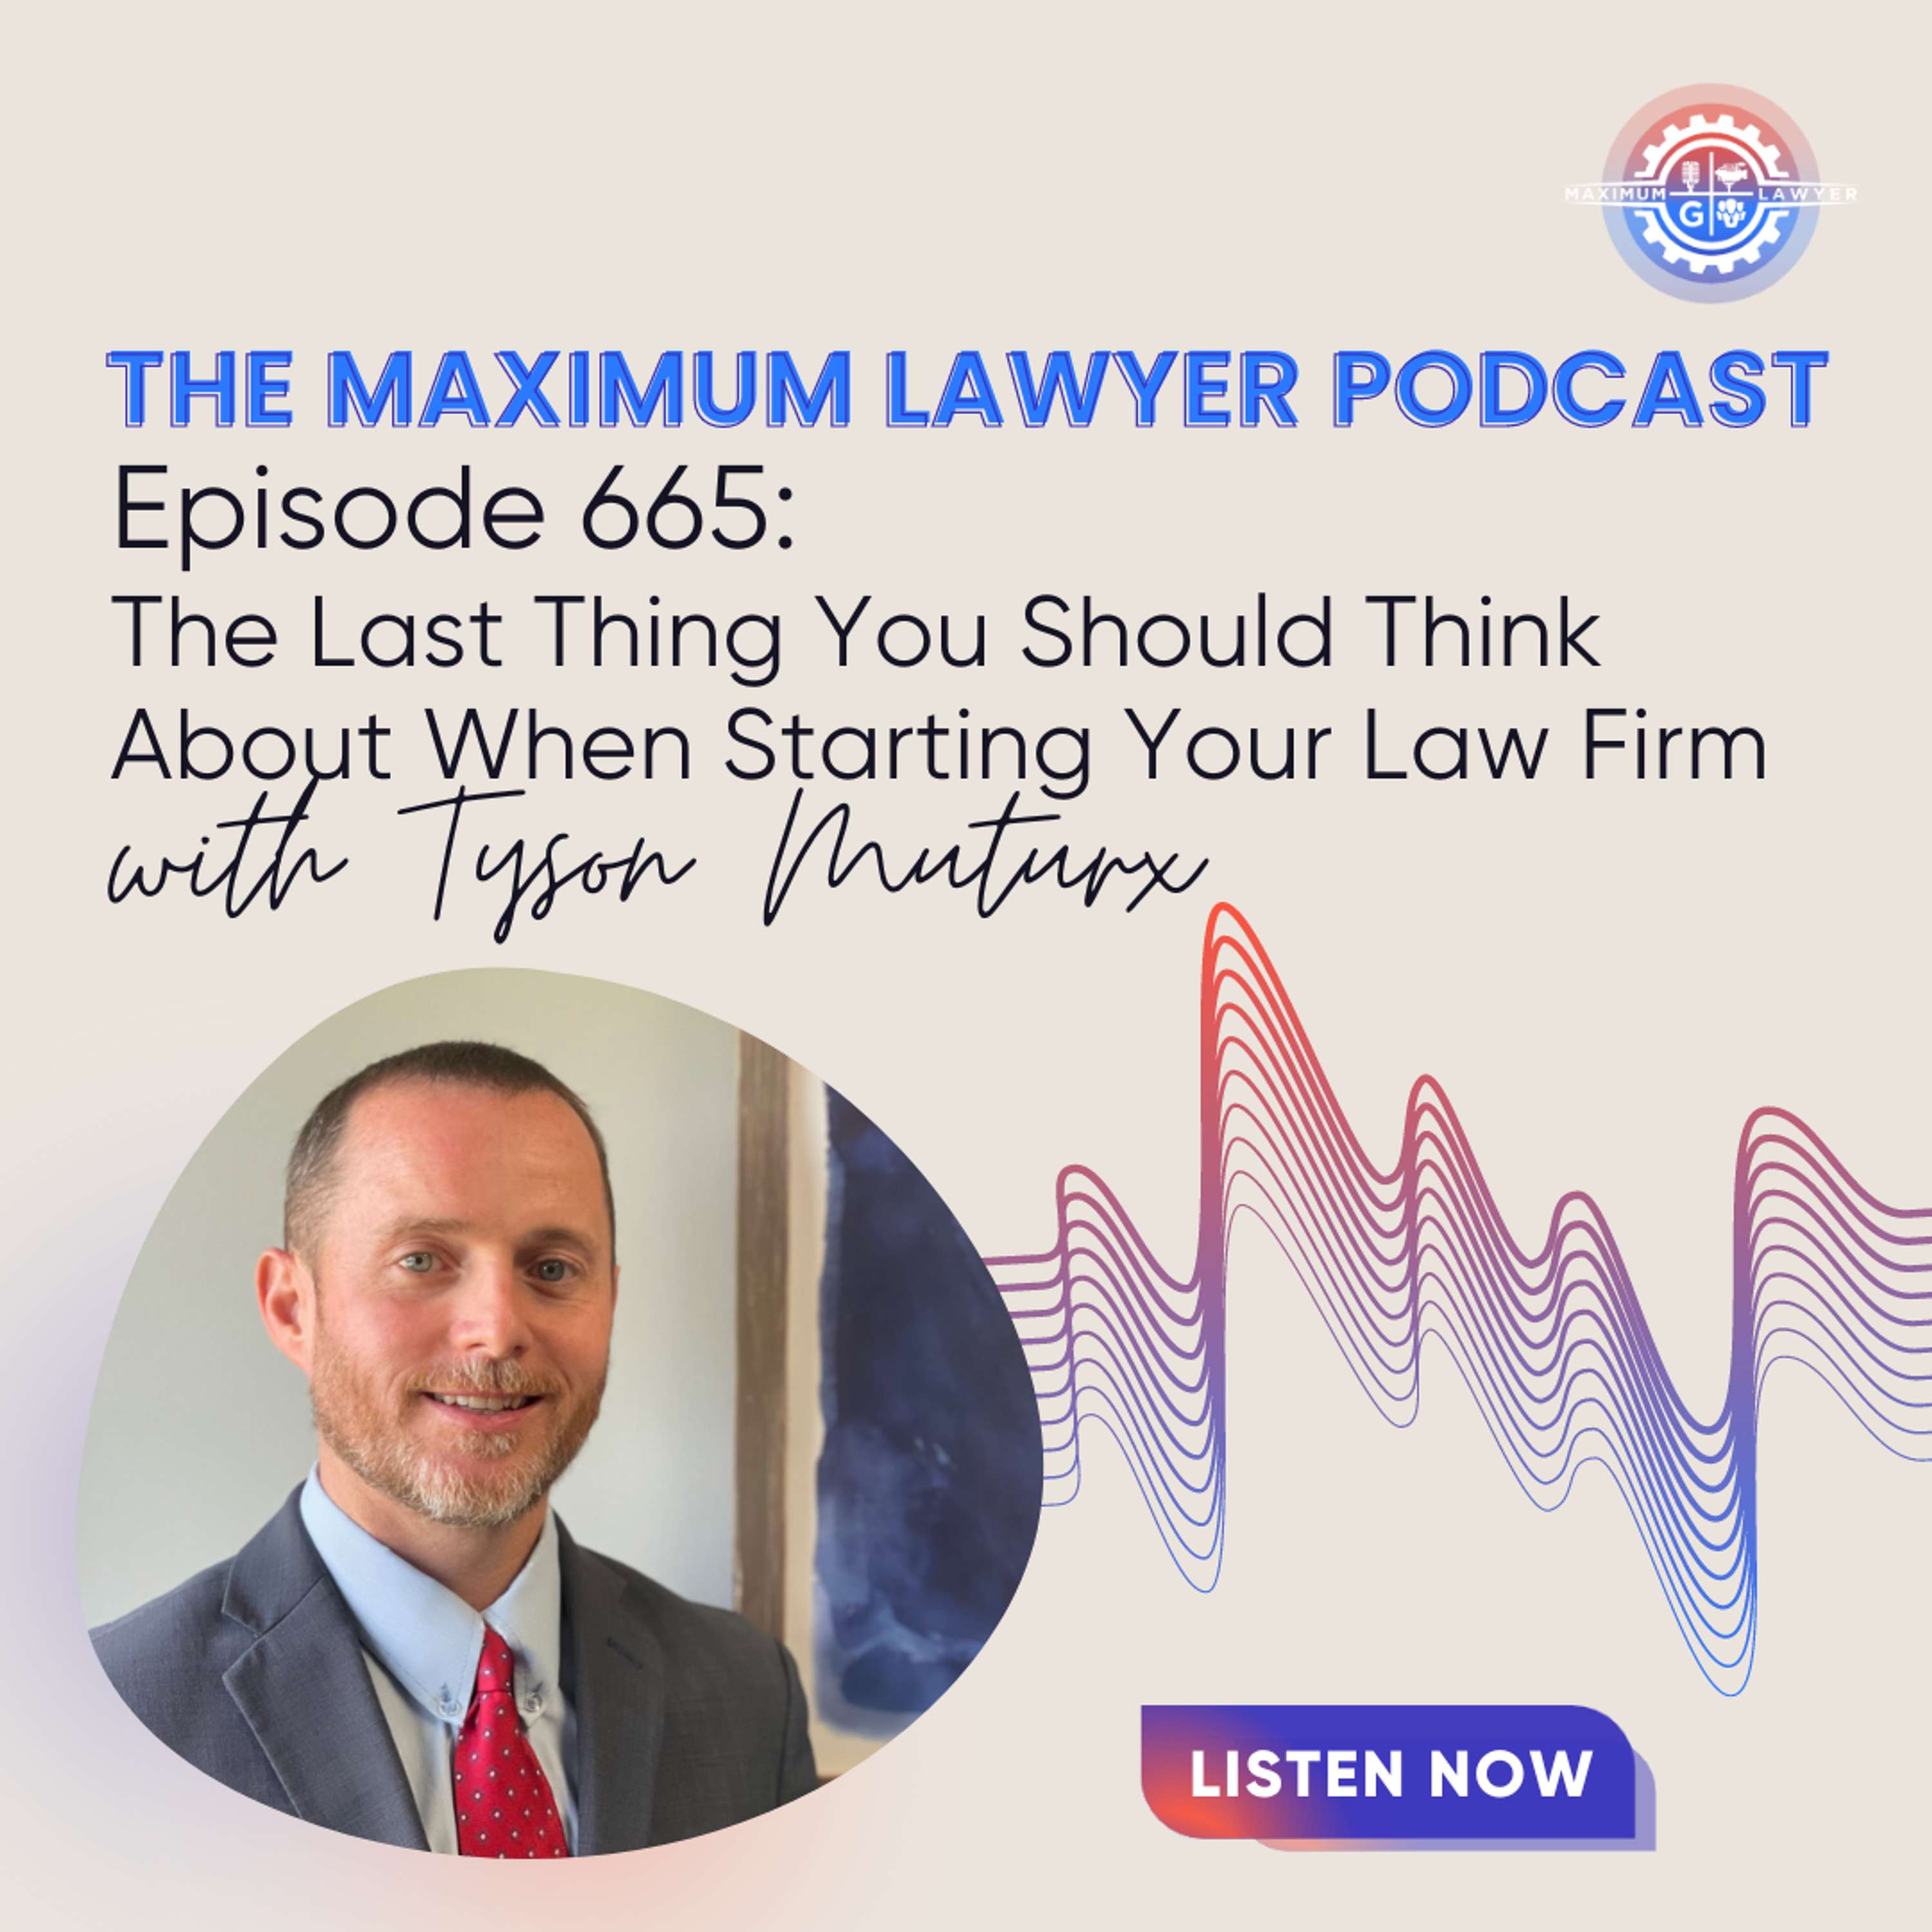 The Last Thing You Should Think About When Starting Your Law Firm